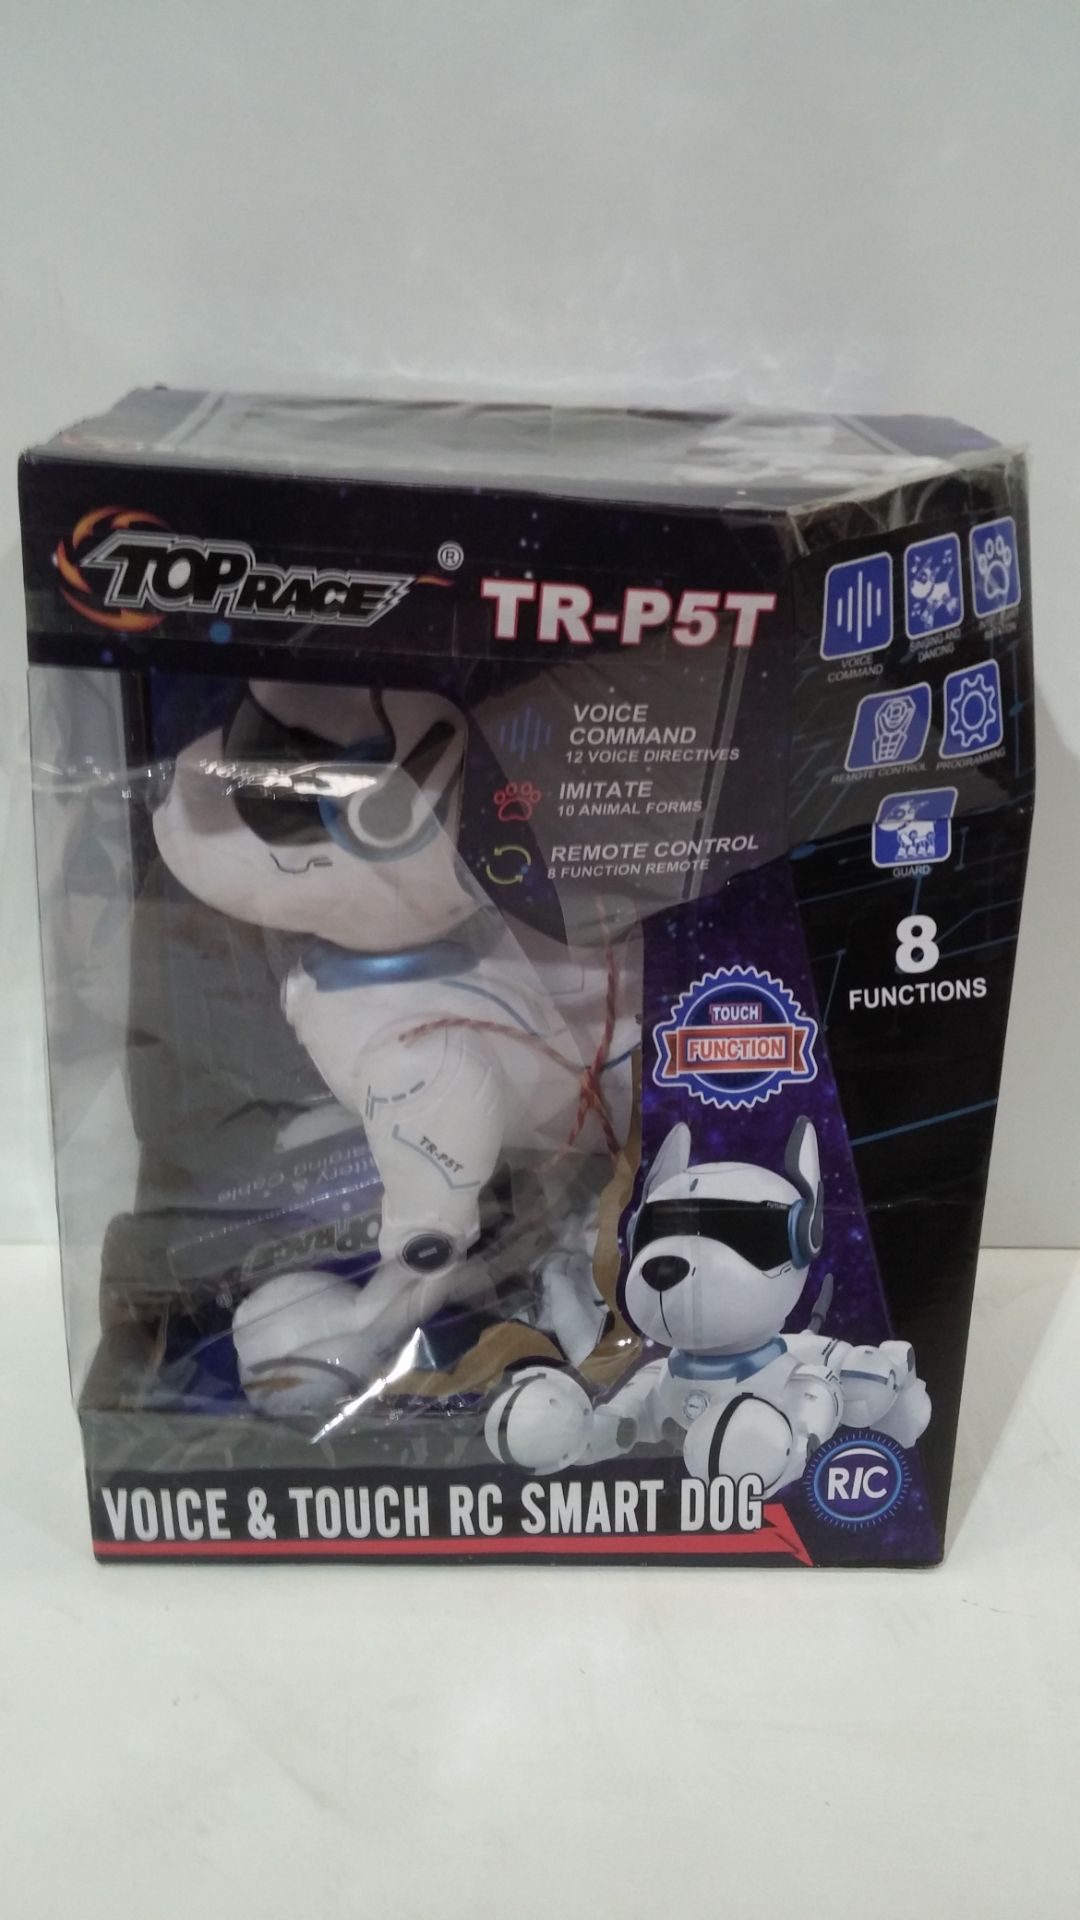 RRP £40 Boxed Toprace TR-P5T Voice & Touch RC Smart Dog